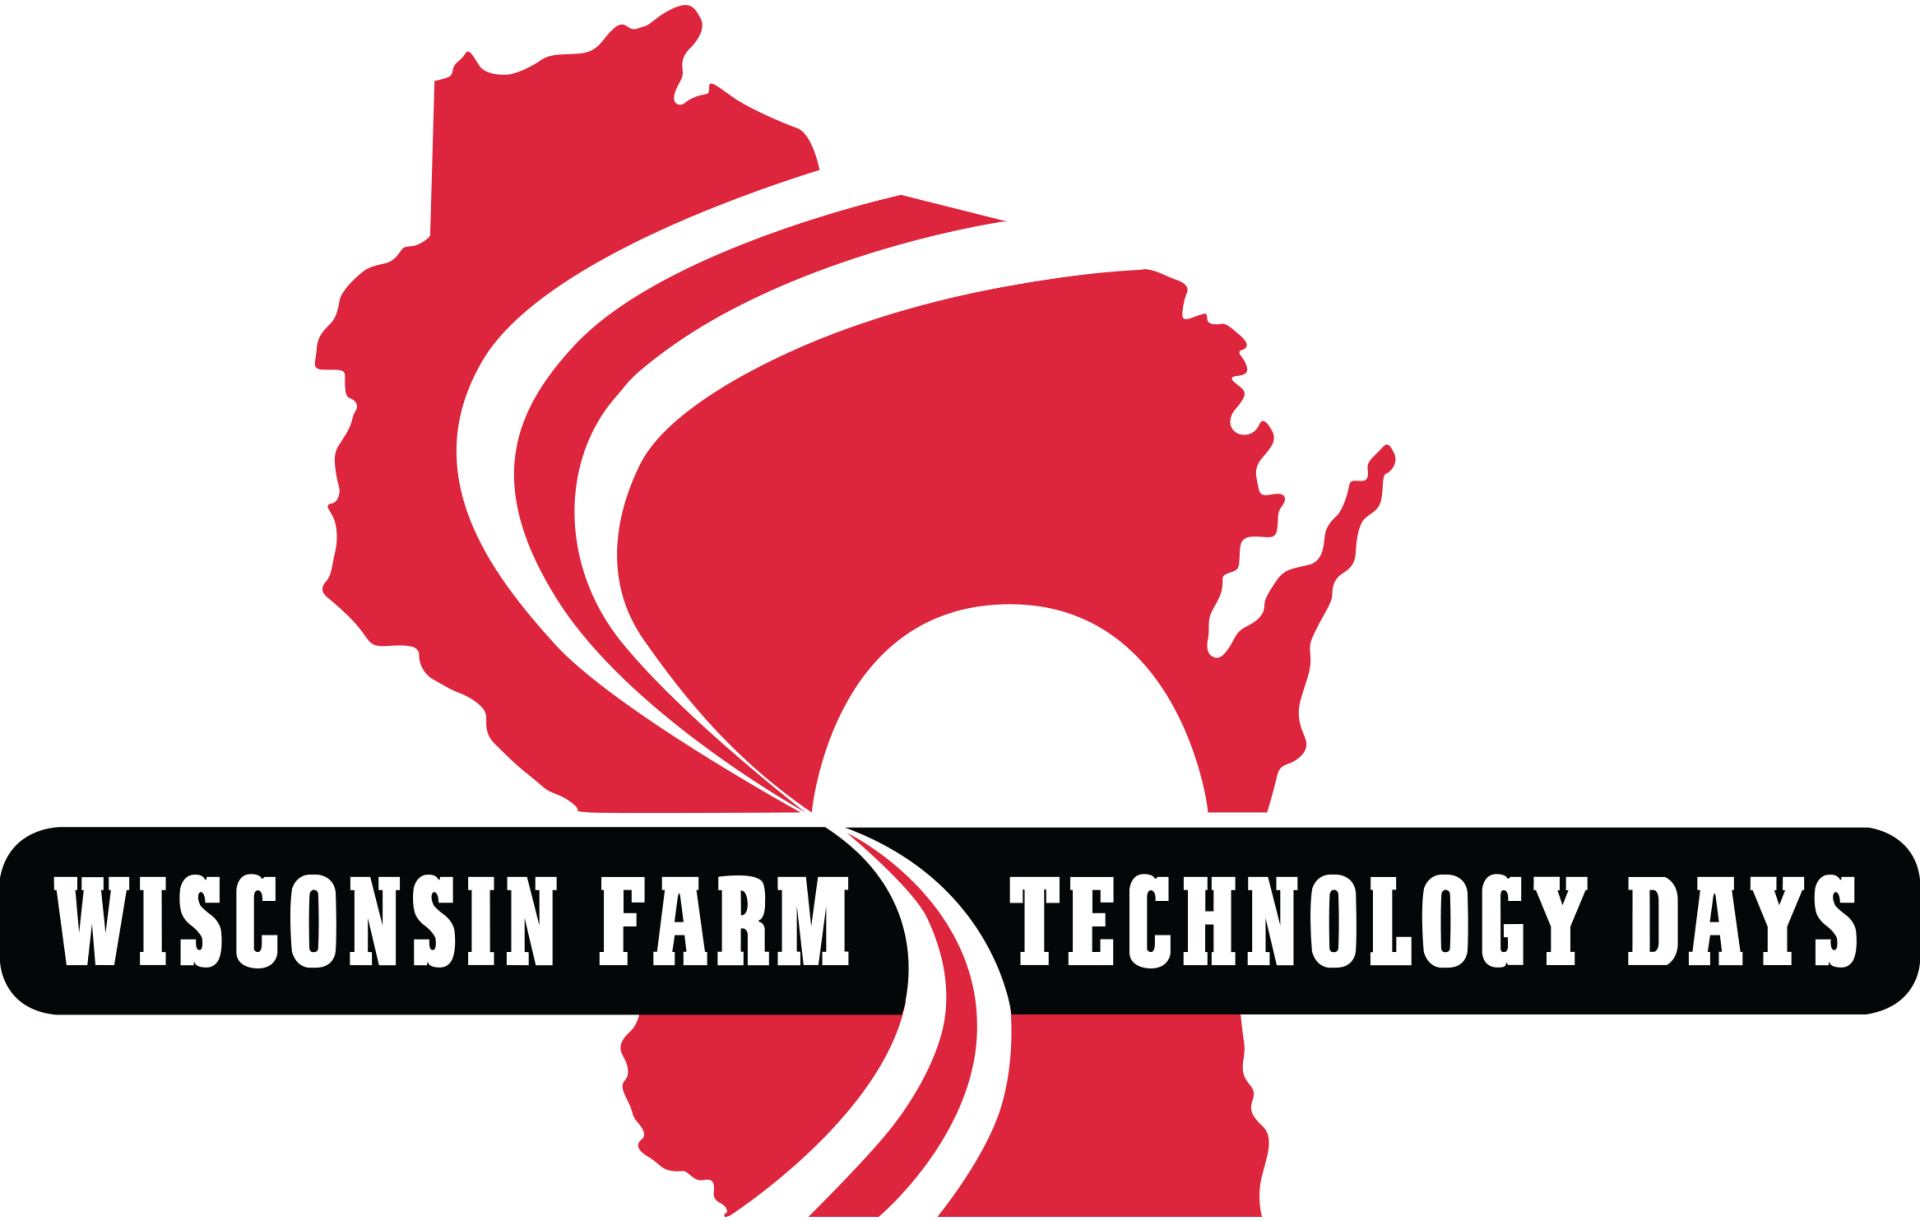 a logo for Wisconsin farm technology days with a map of Wisconsin